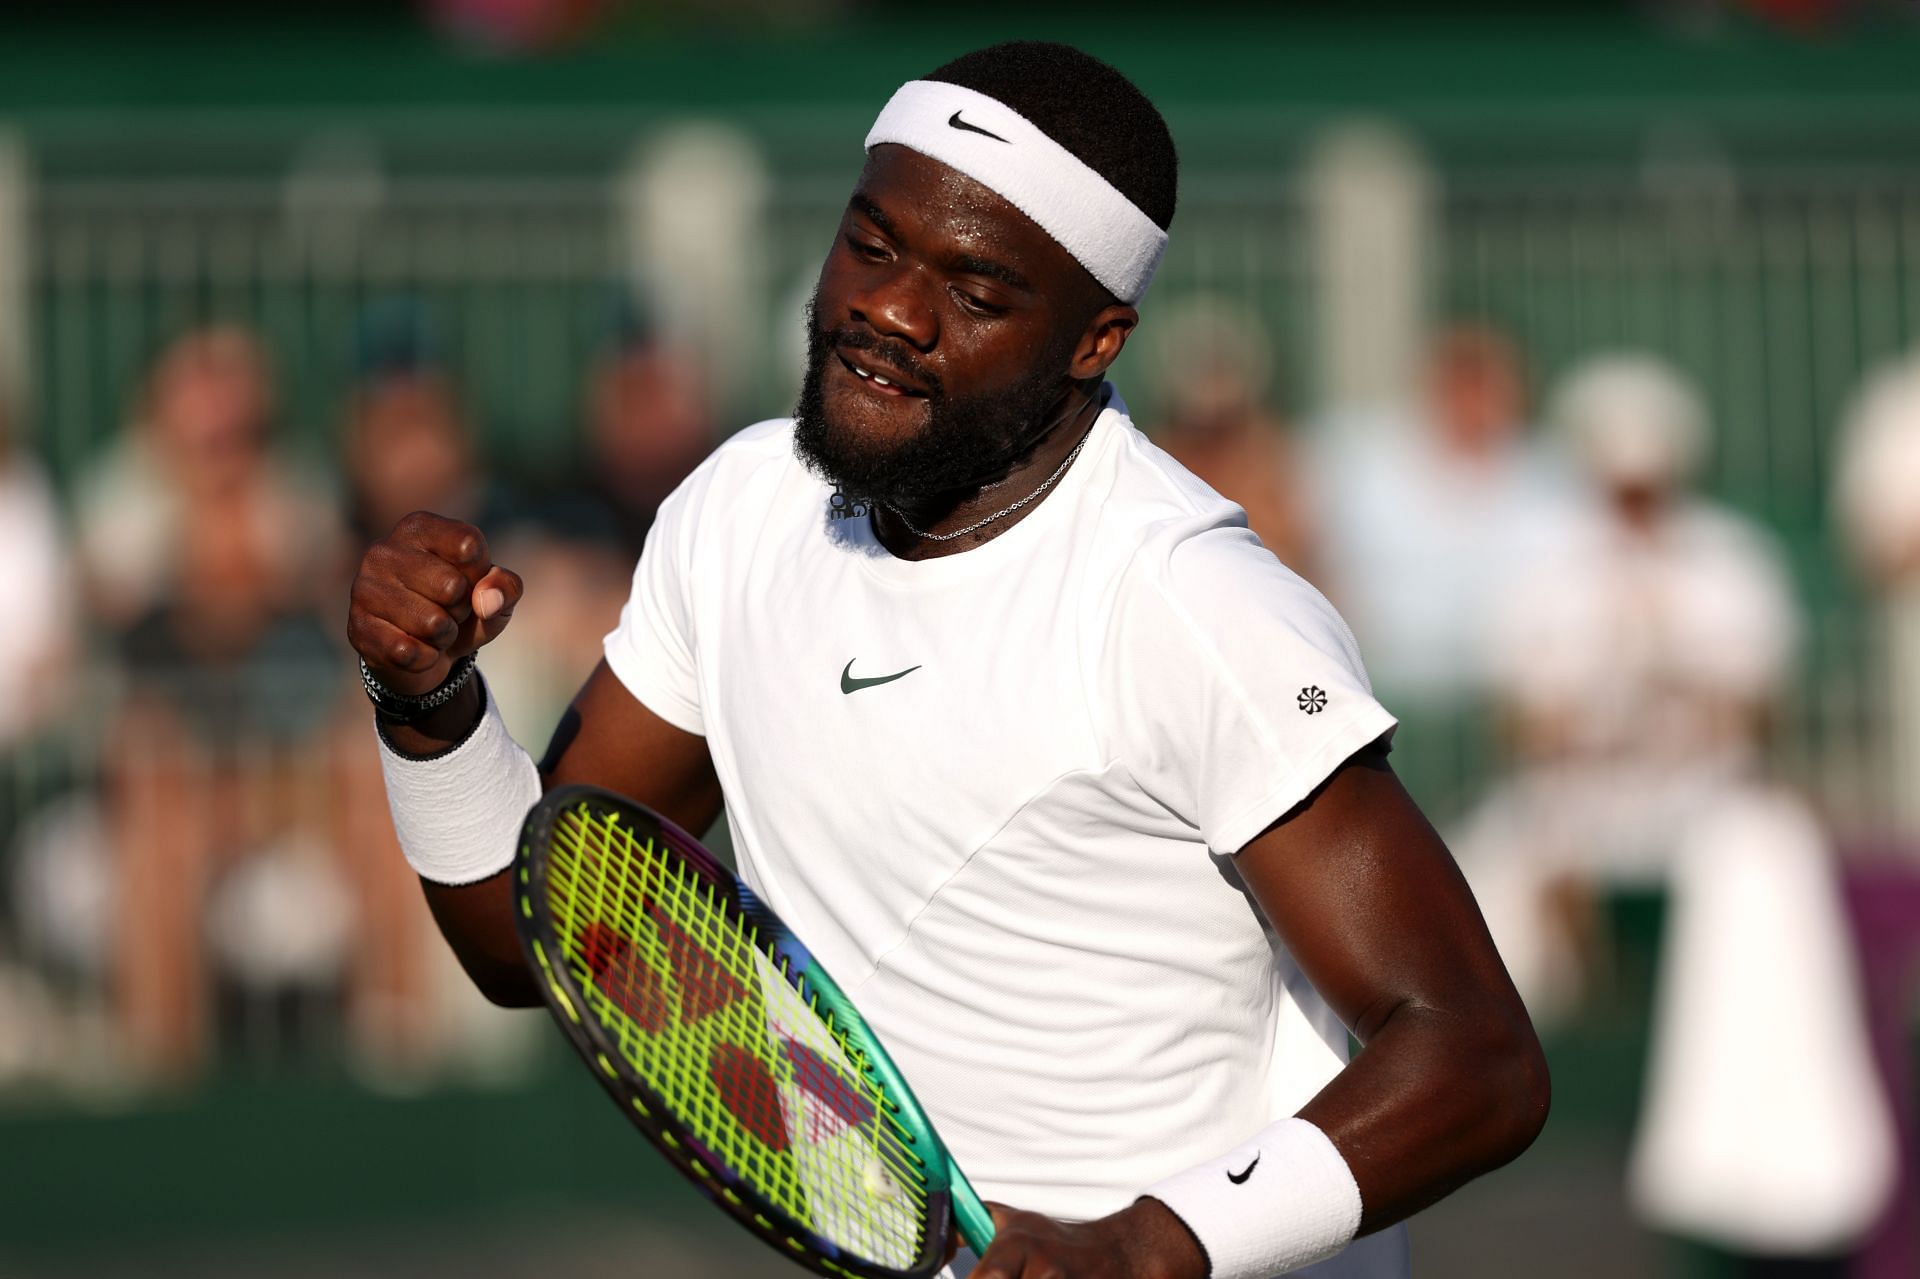 Wimbledon 2023 US players TV Schedule When are Frances Tiafoe, Jessica Pegula and other Americans playing?